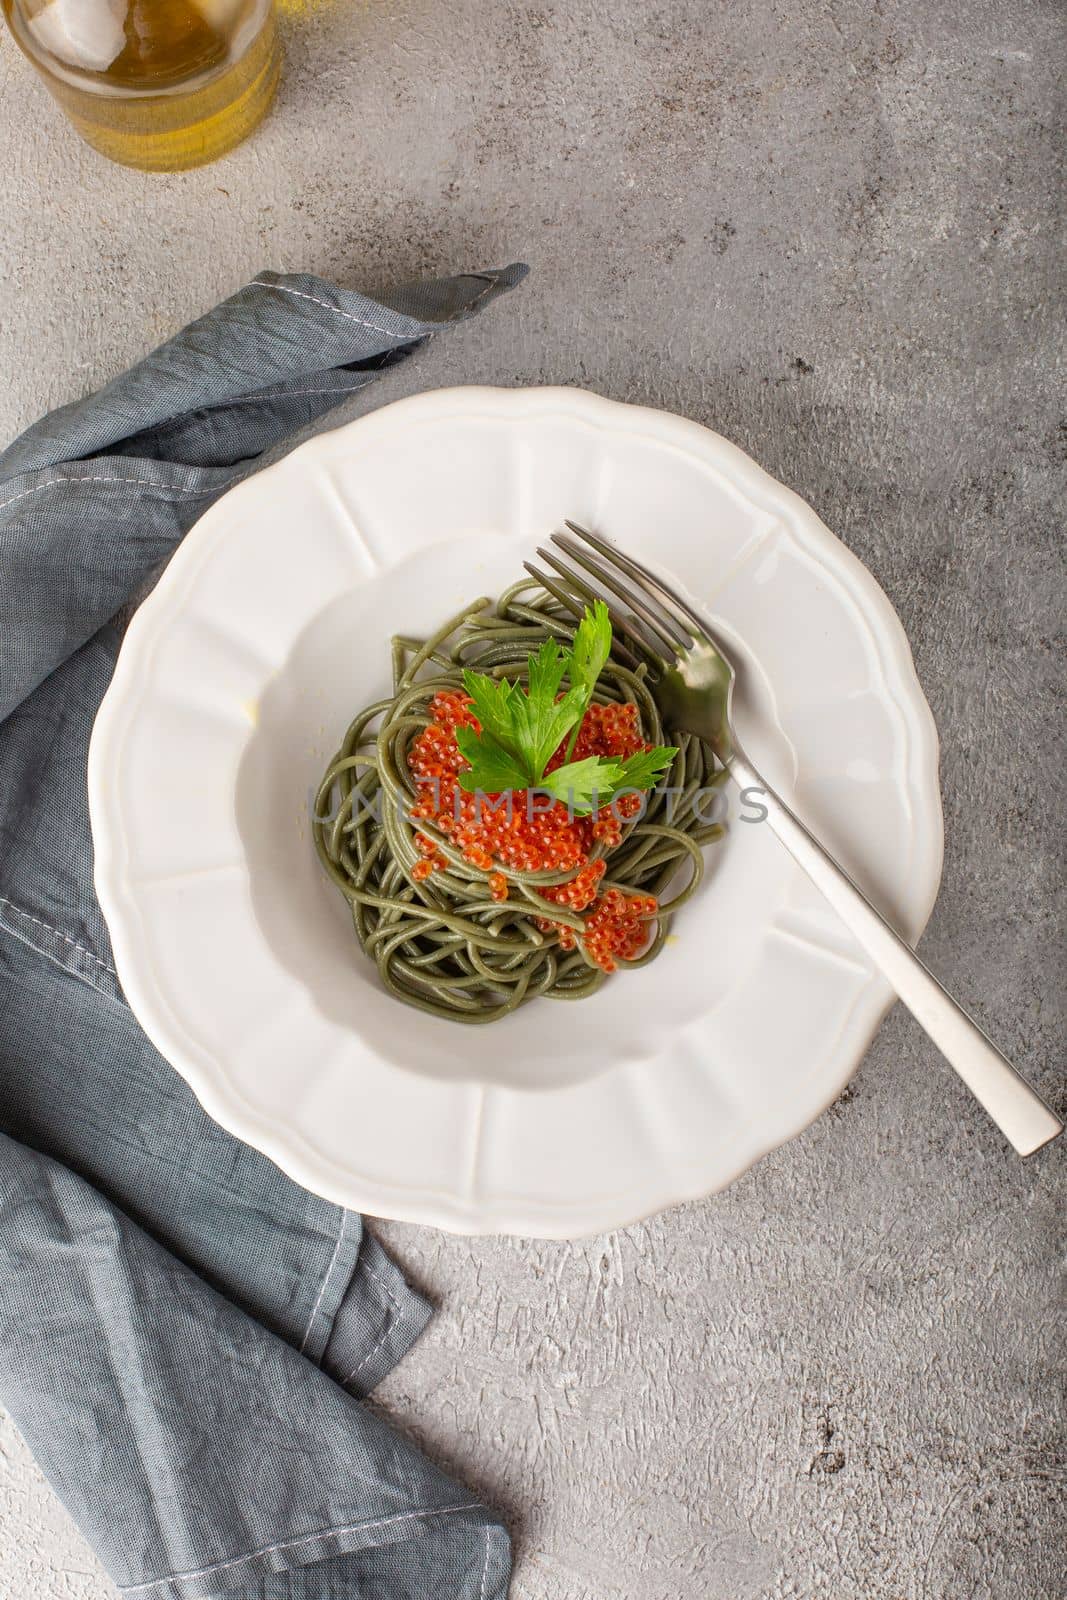 Spirulina noodles with red caviar on a white plate top view by Ciorba